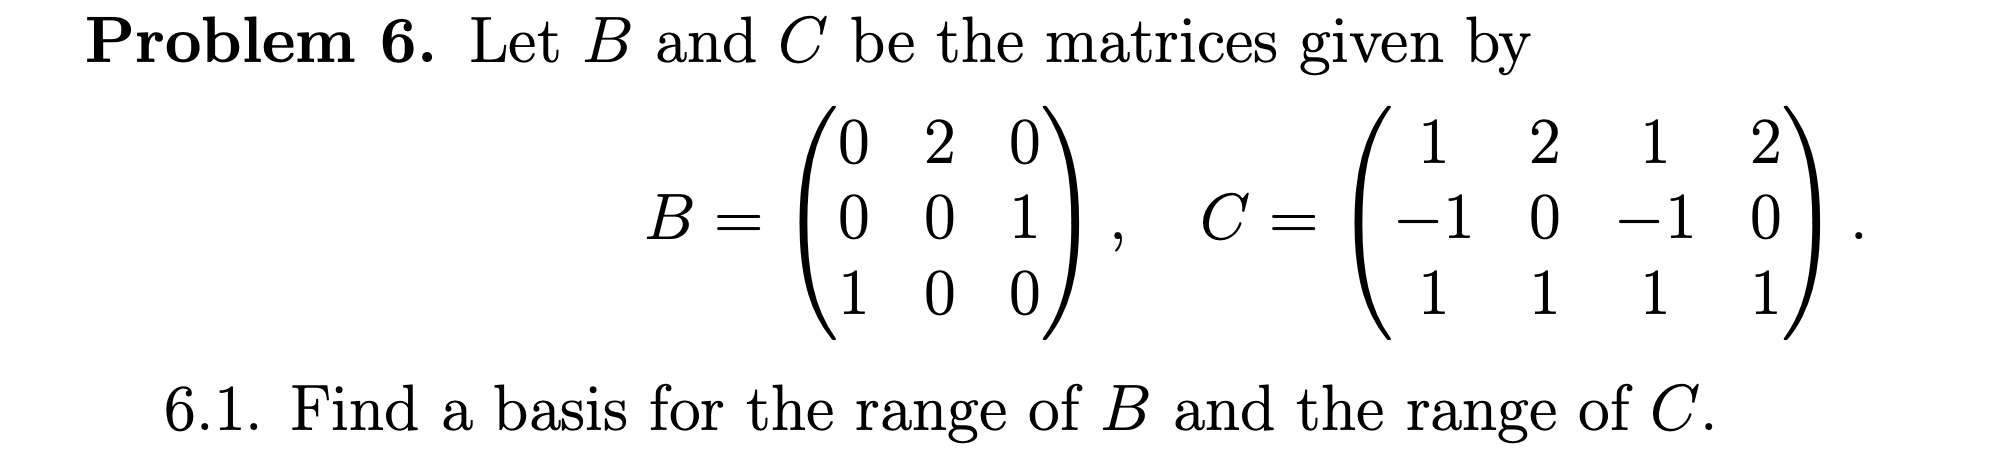 Problem 6. Let B and C be the matrices given by
0 0 1
1 0 0
C =
-1 0 -1 0
1
6.1. Find a basis for the range of B and the range of C.
